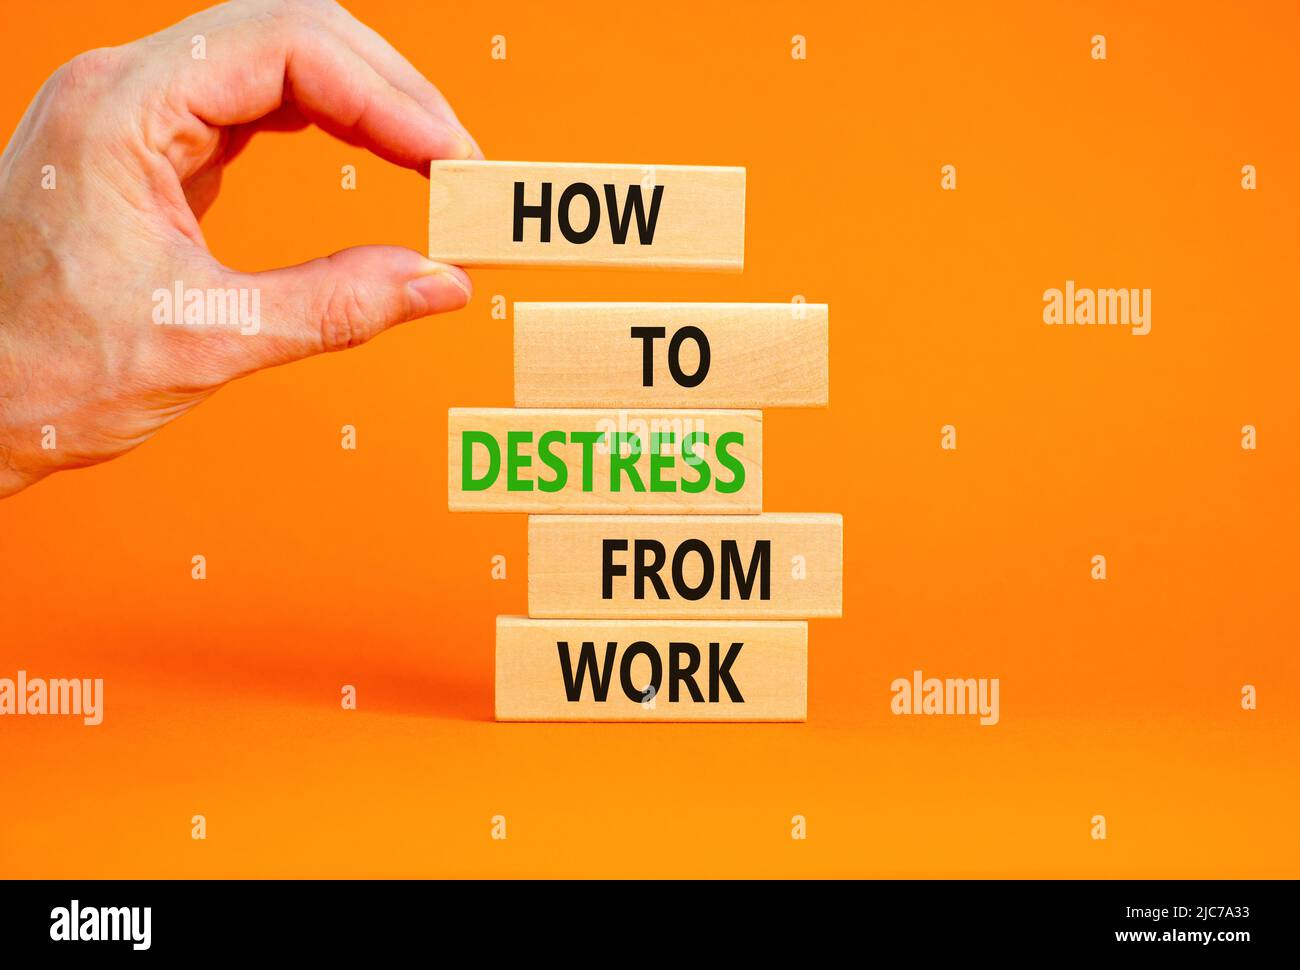 Destress from work symbol. Concept words How to destress from work on wooden blocks. Doctor hand. Beautiful orange background. Psychological business Stock Photo